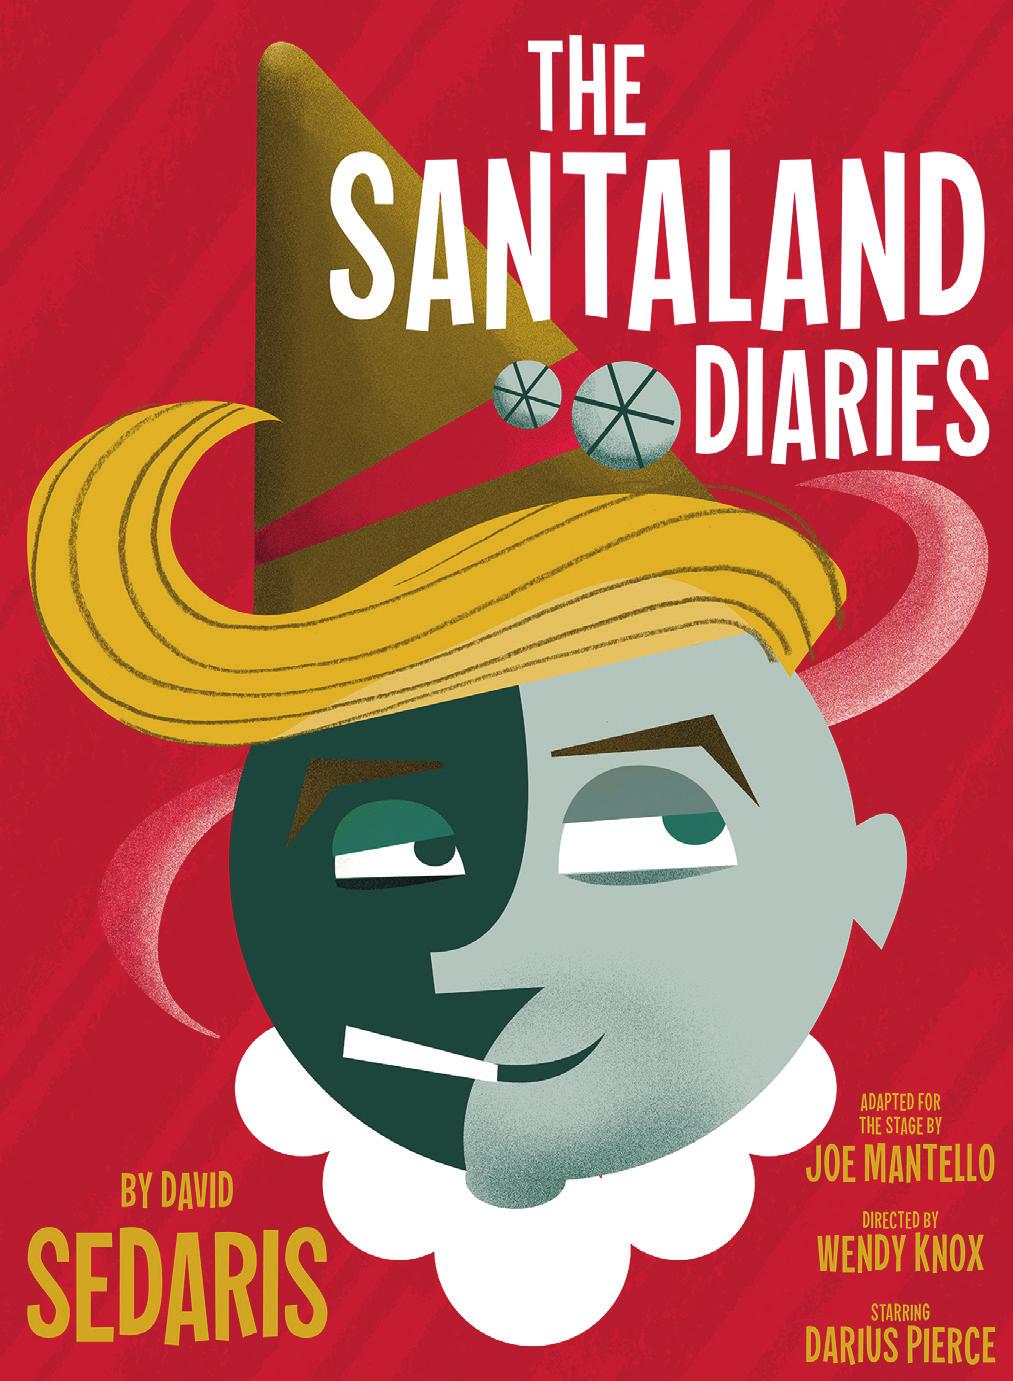 The Guide A theatergoer s resource edited by the Education & Community Programs department at Portland Center Stage The Santaland Diaries By David Sedaris; Adapted for the stage by Joe Mantello;